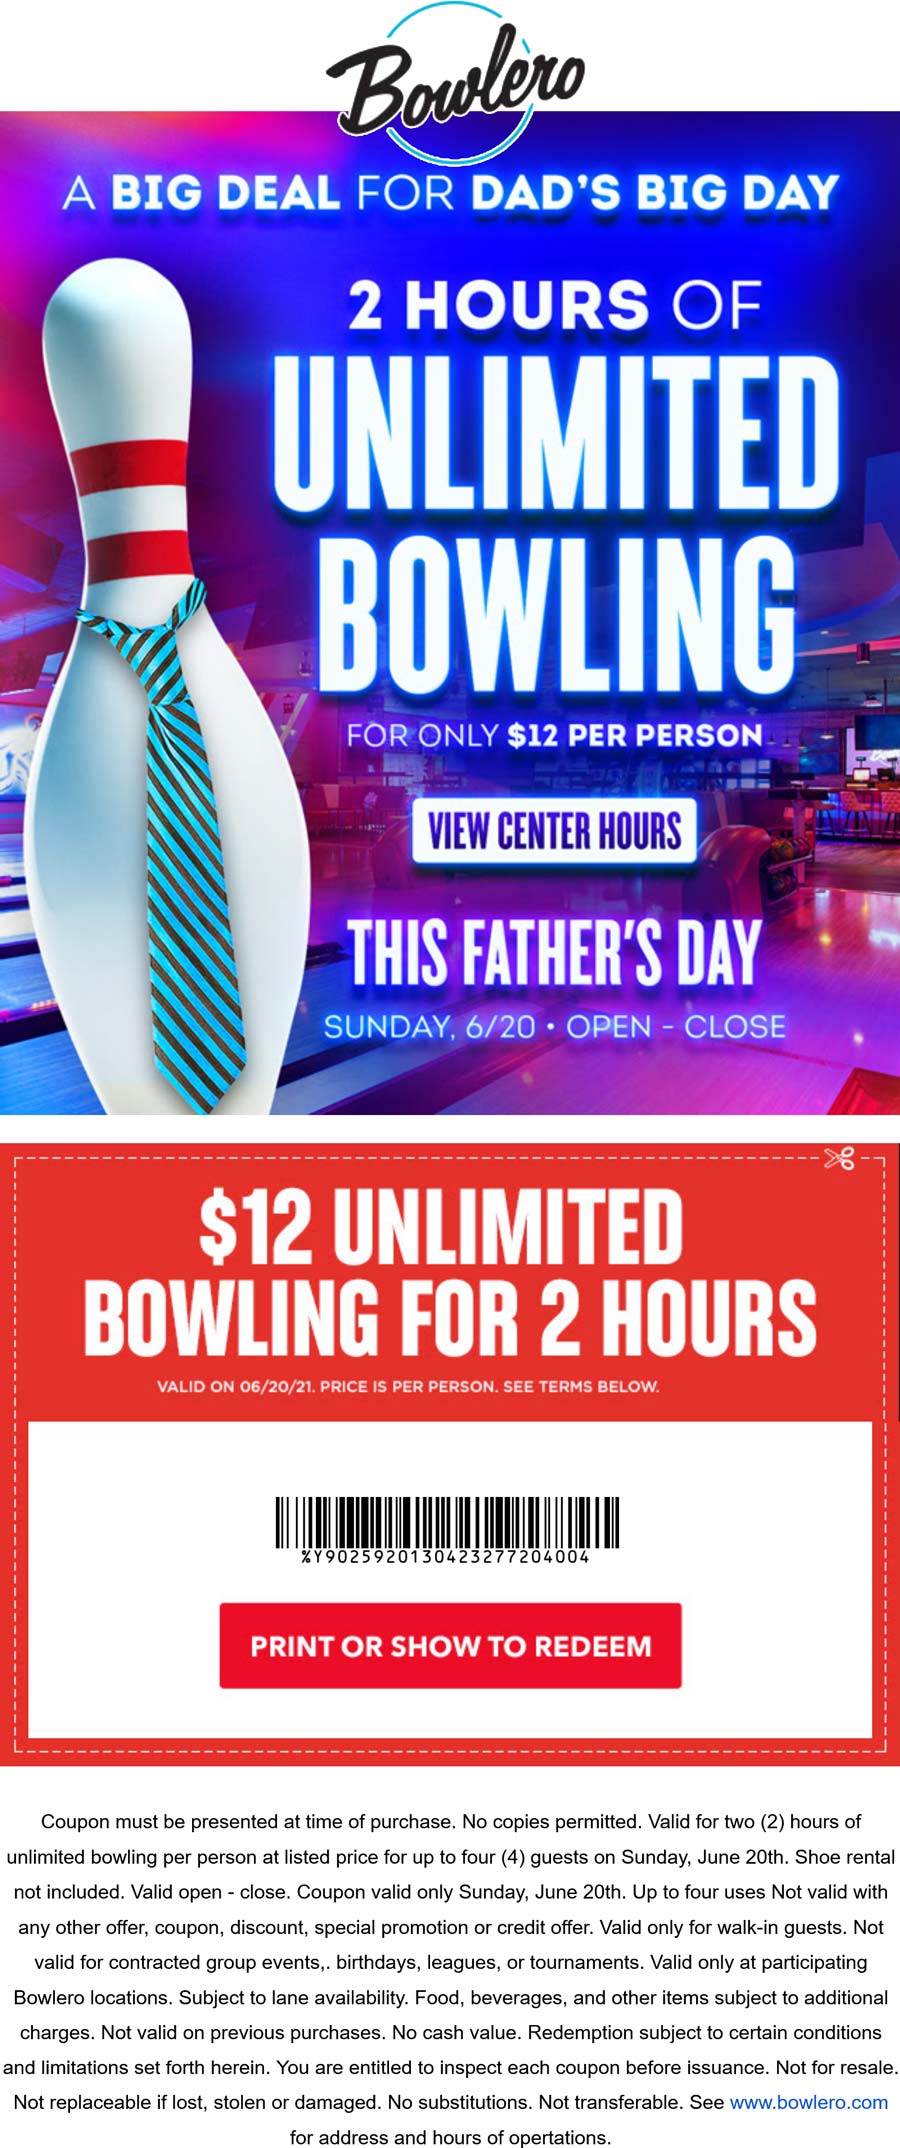 Bowlero stores Coupon  2hrs unlimited bowling for $12 Sunday at Bowlero lanes #bowlero 